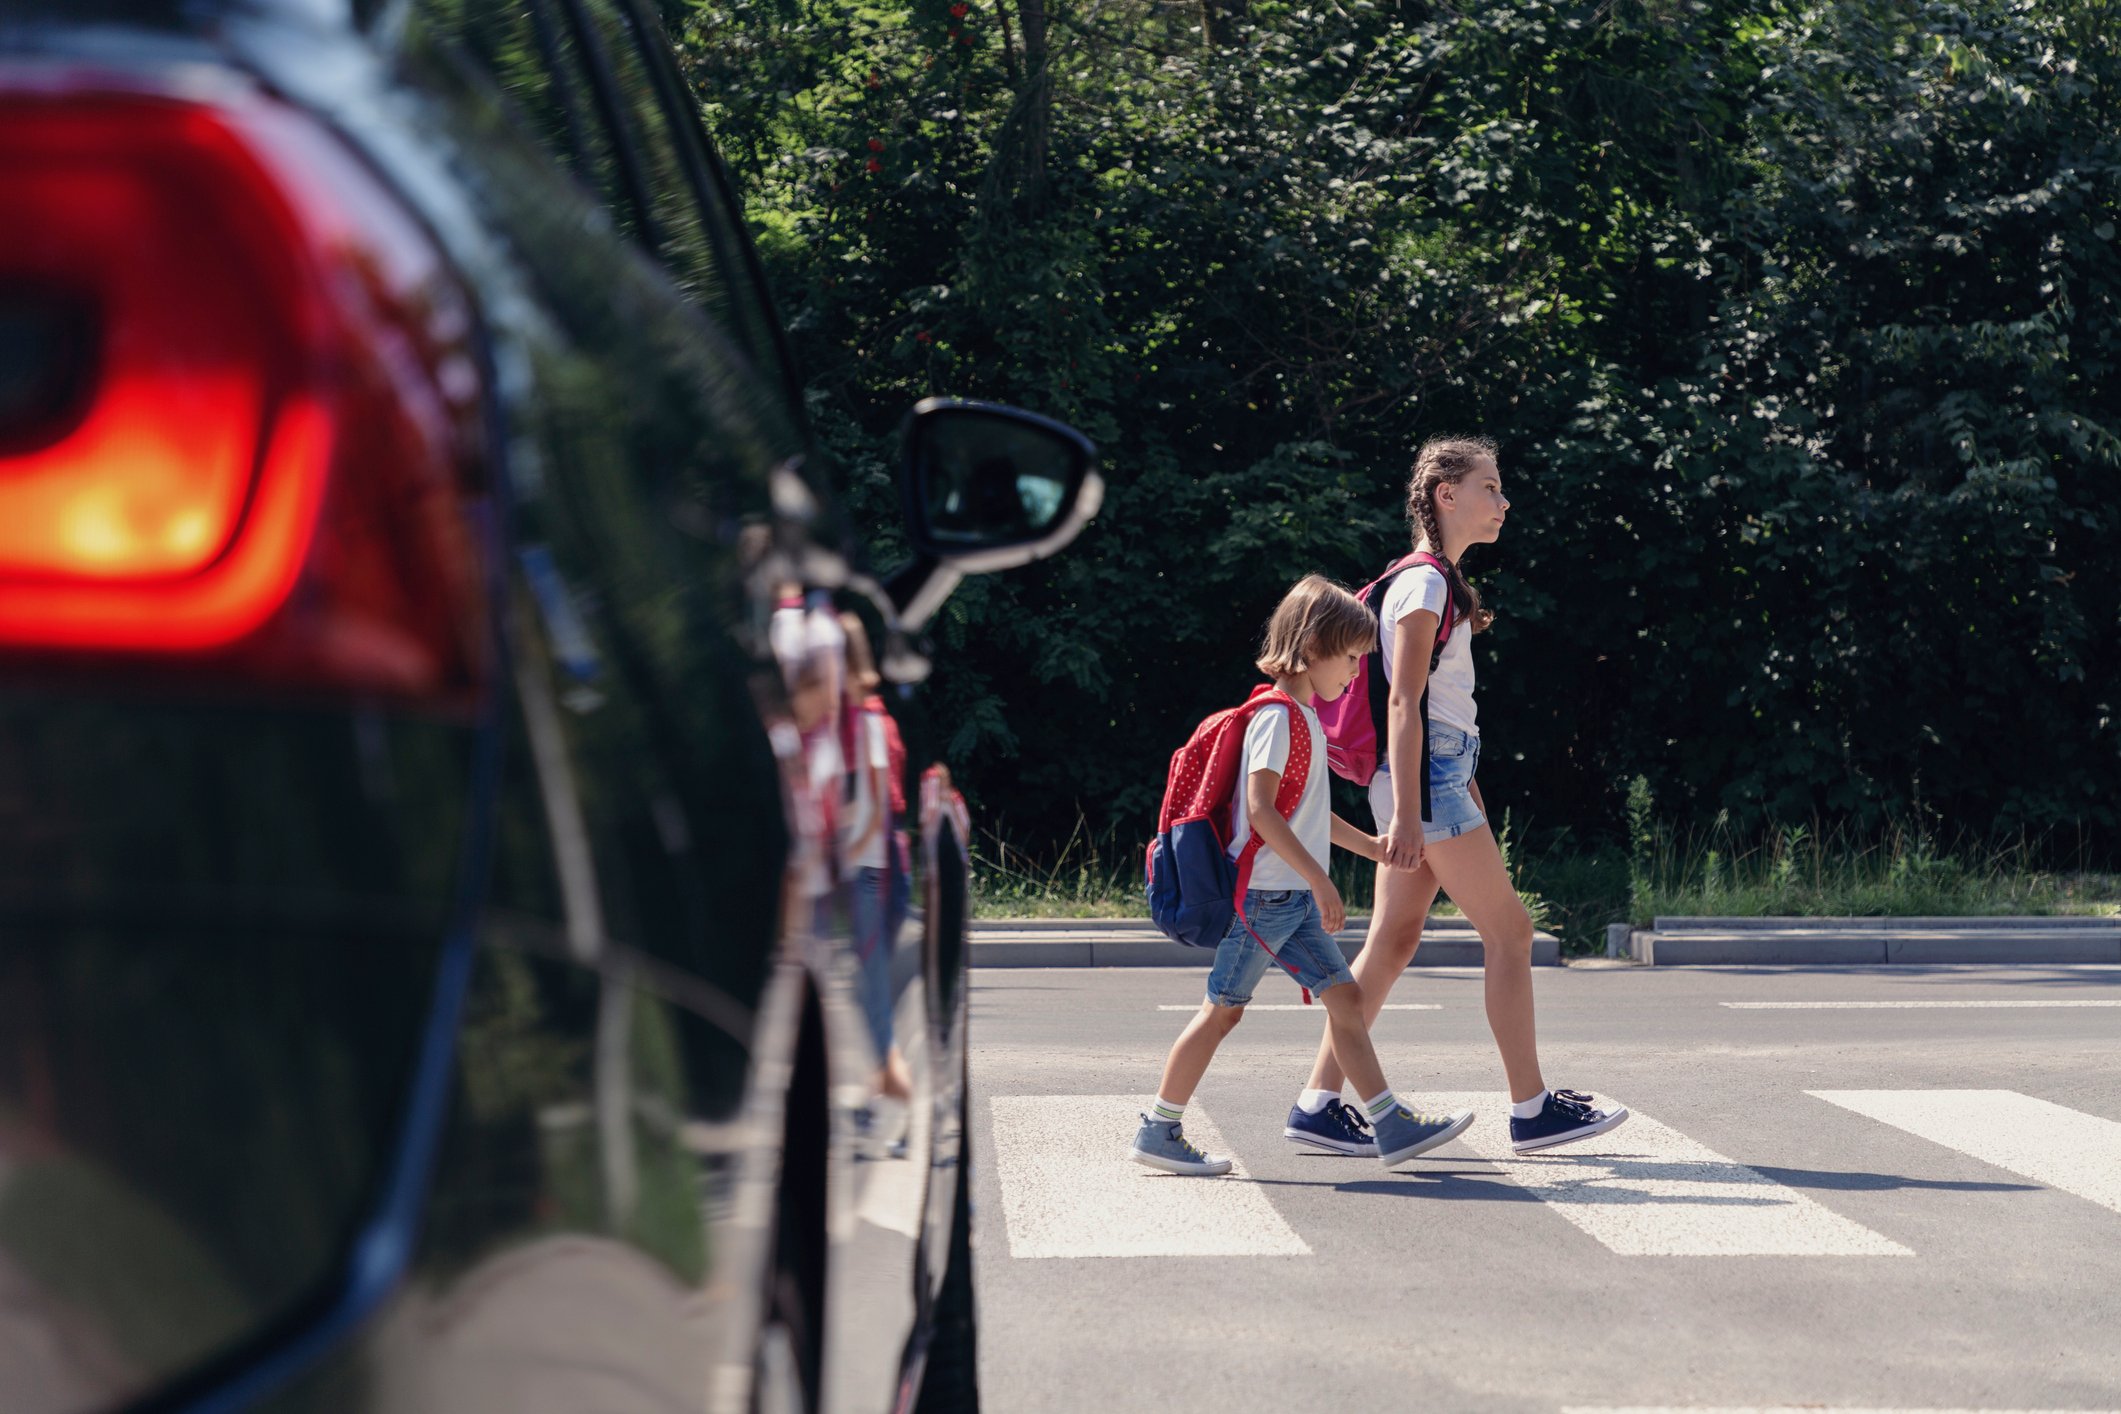 How to Talk to Children About Road Safety